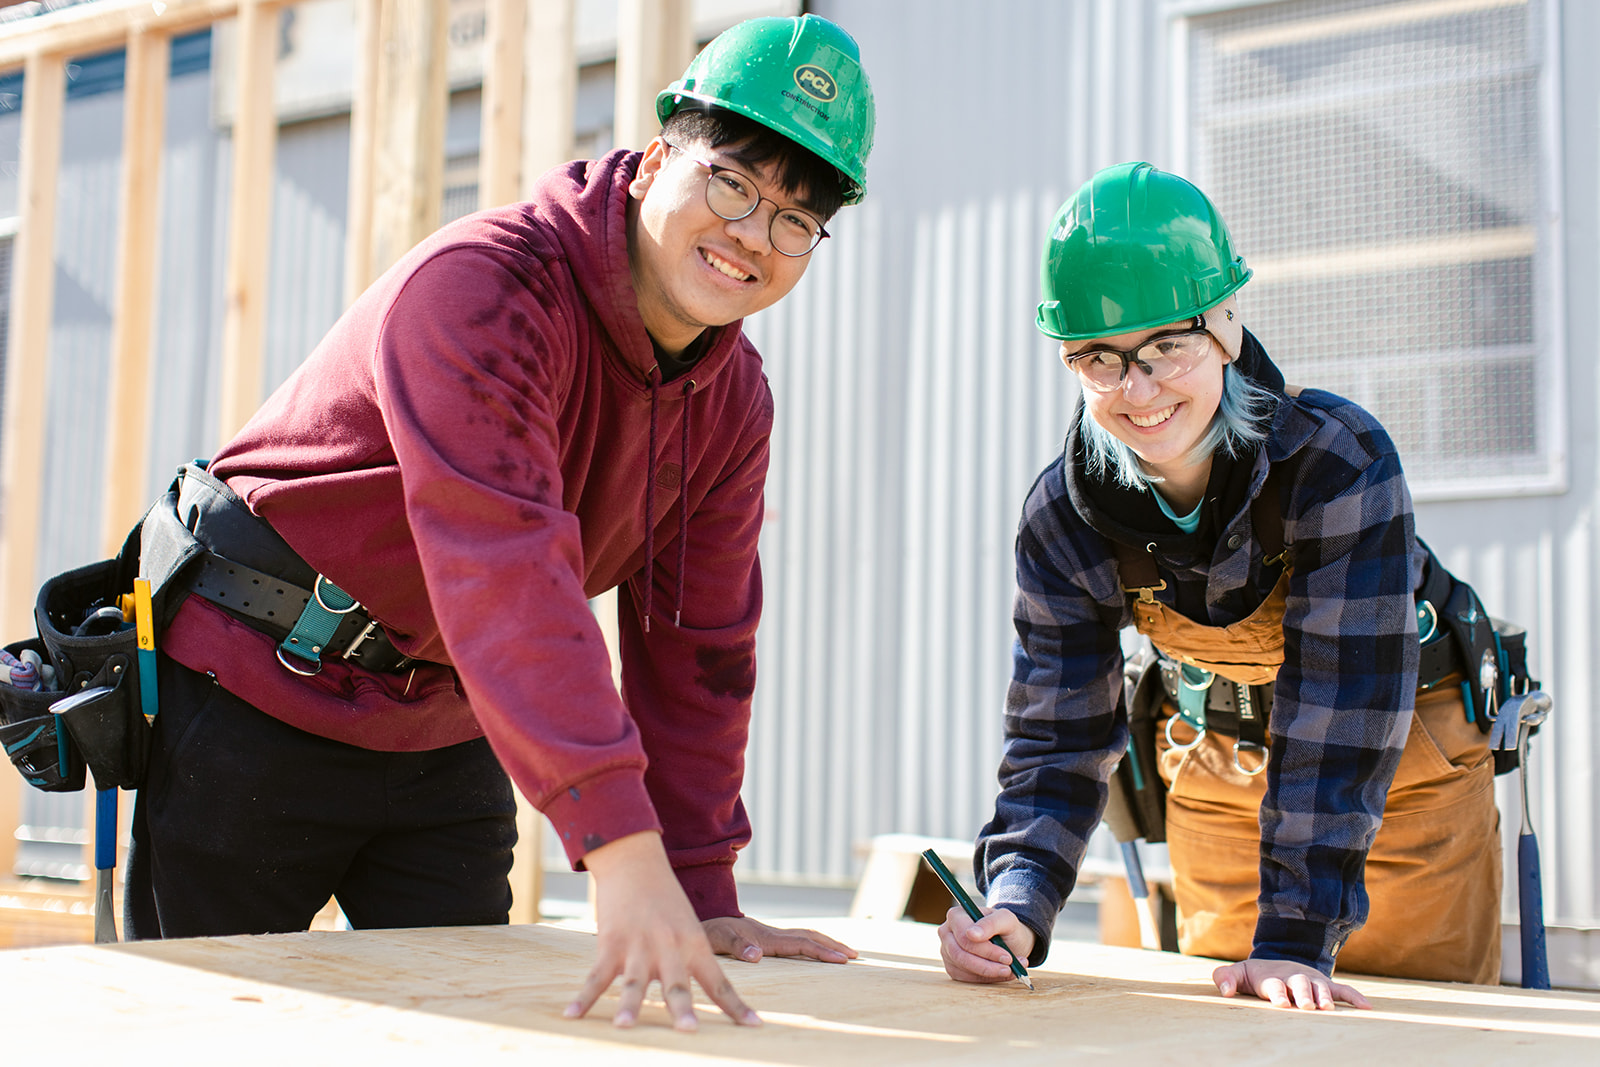 Two youth carpenters wearing green helmets smiling, writing on wooden board on site.